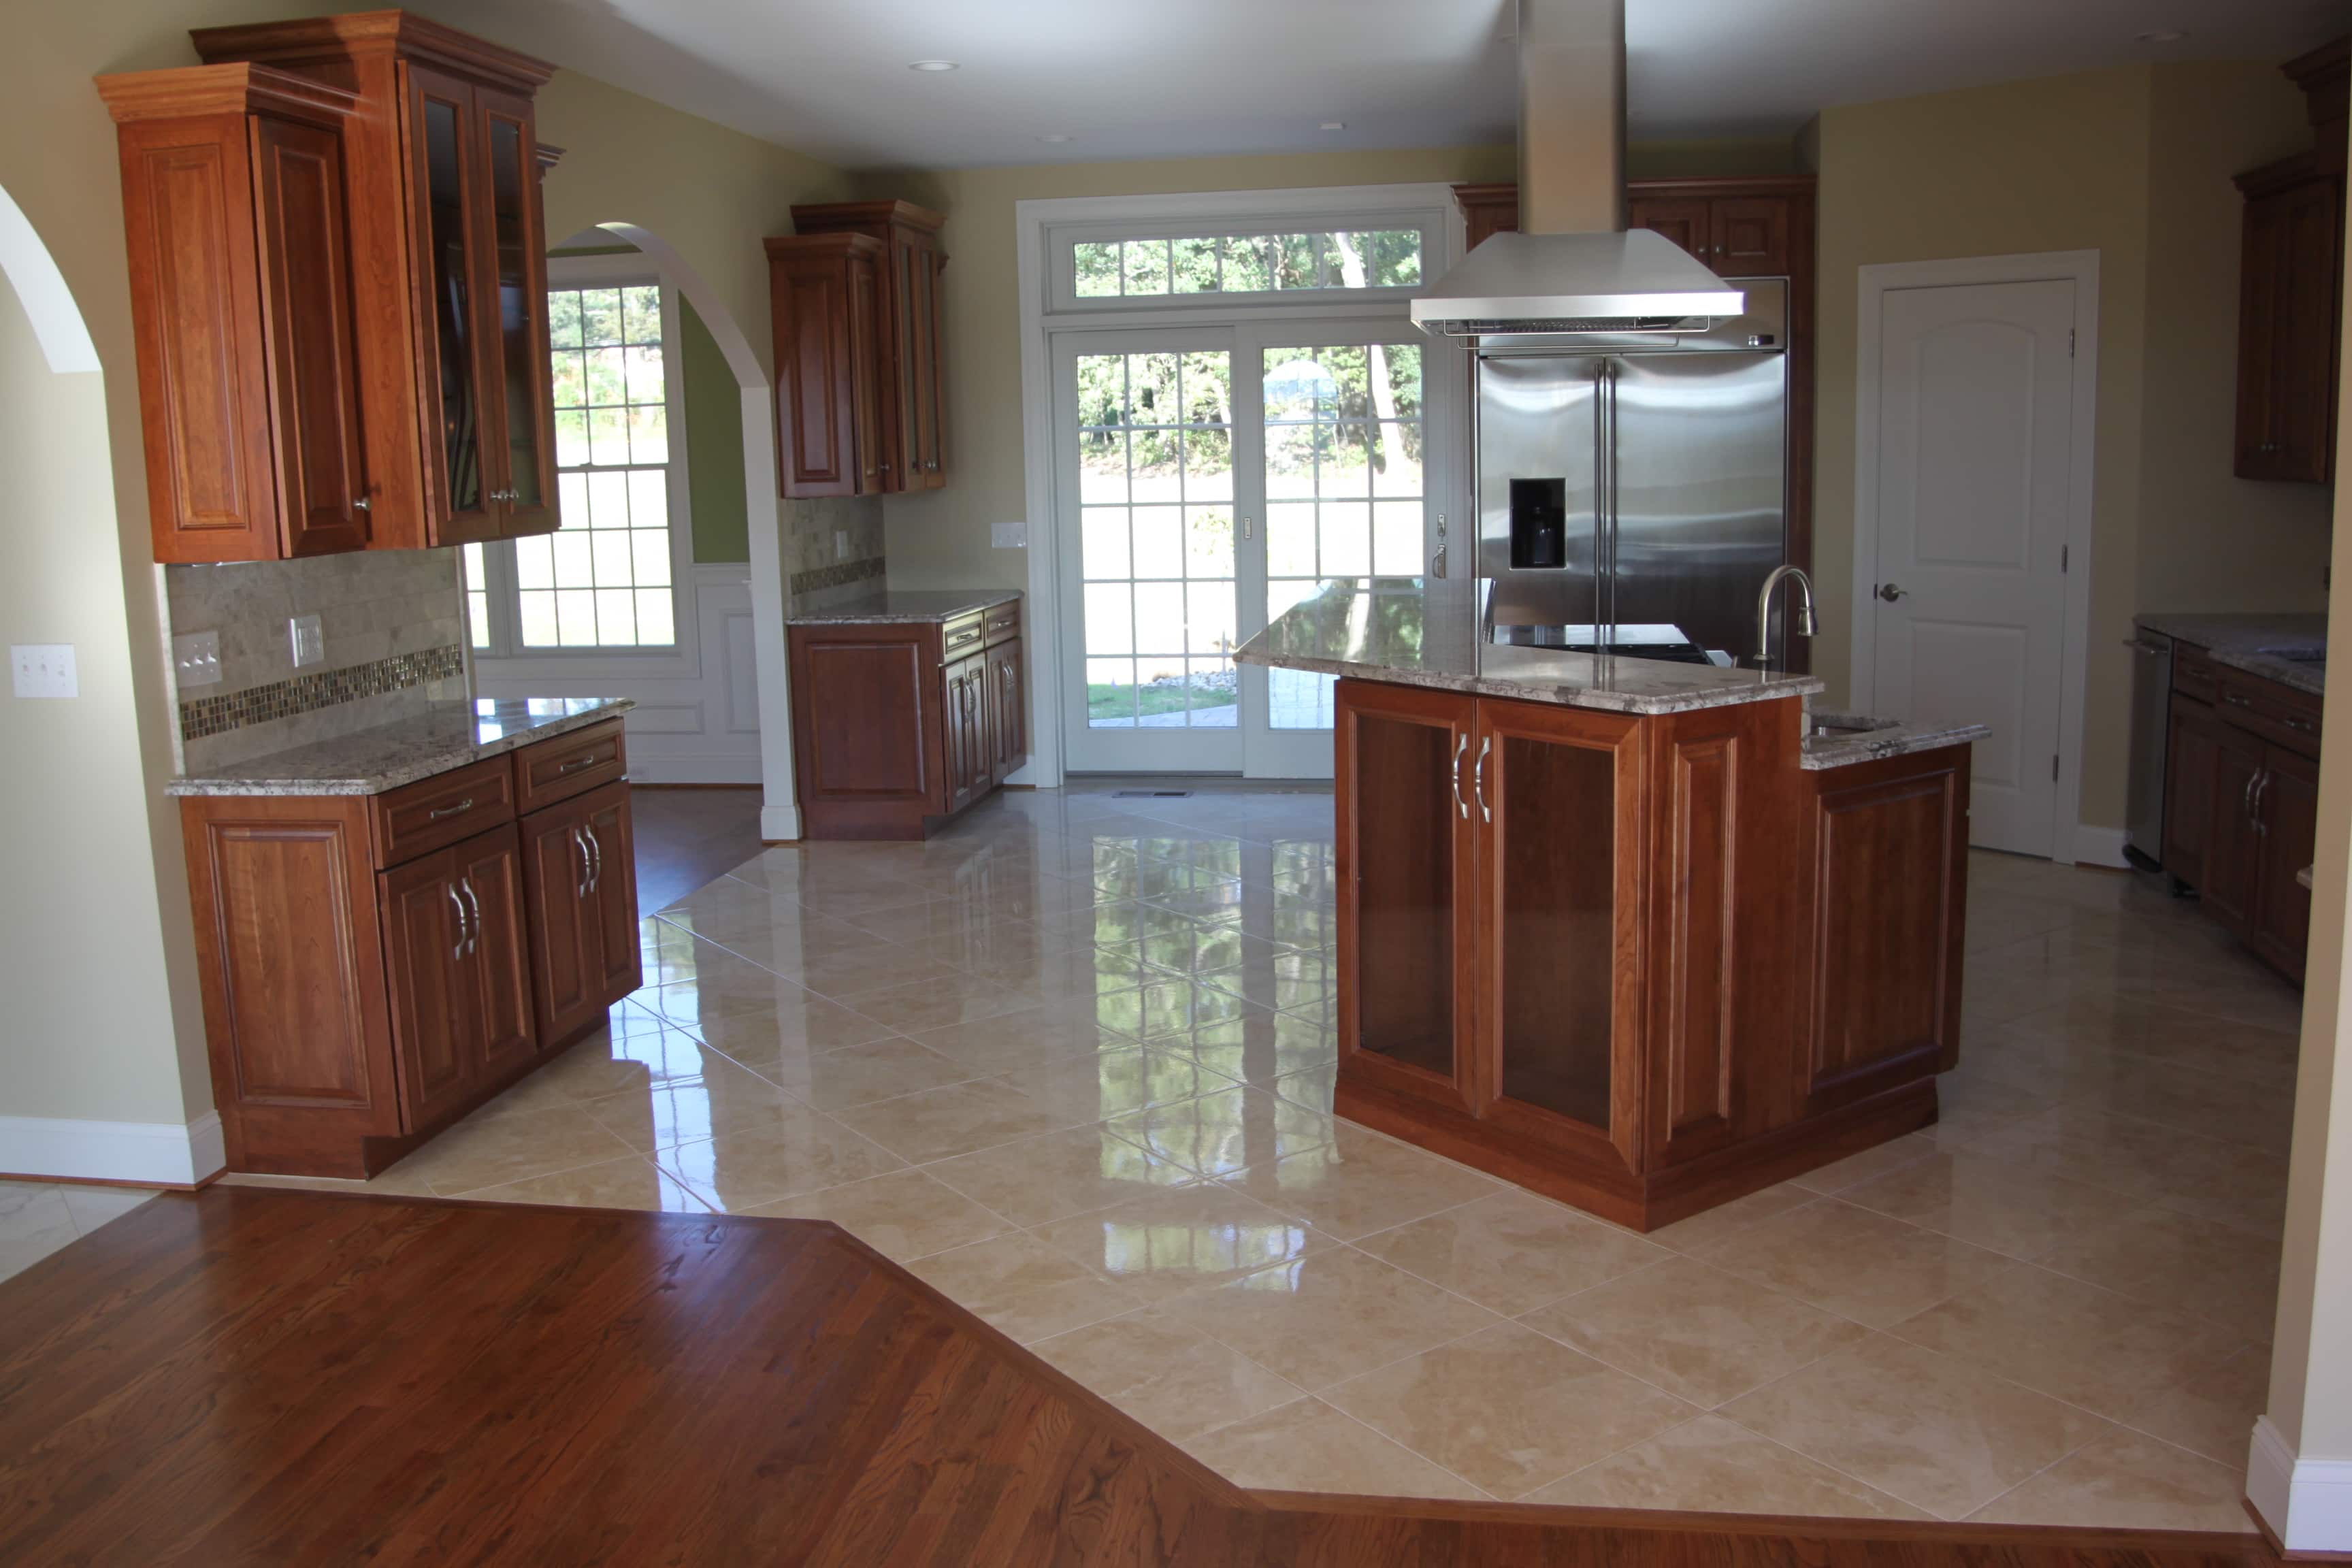 Matching Countertops To Cabinets, Matching Laminate Flooring To Cabinets